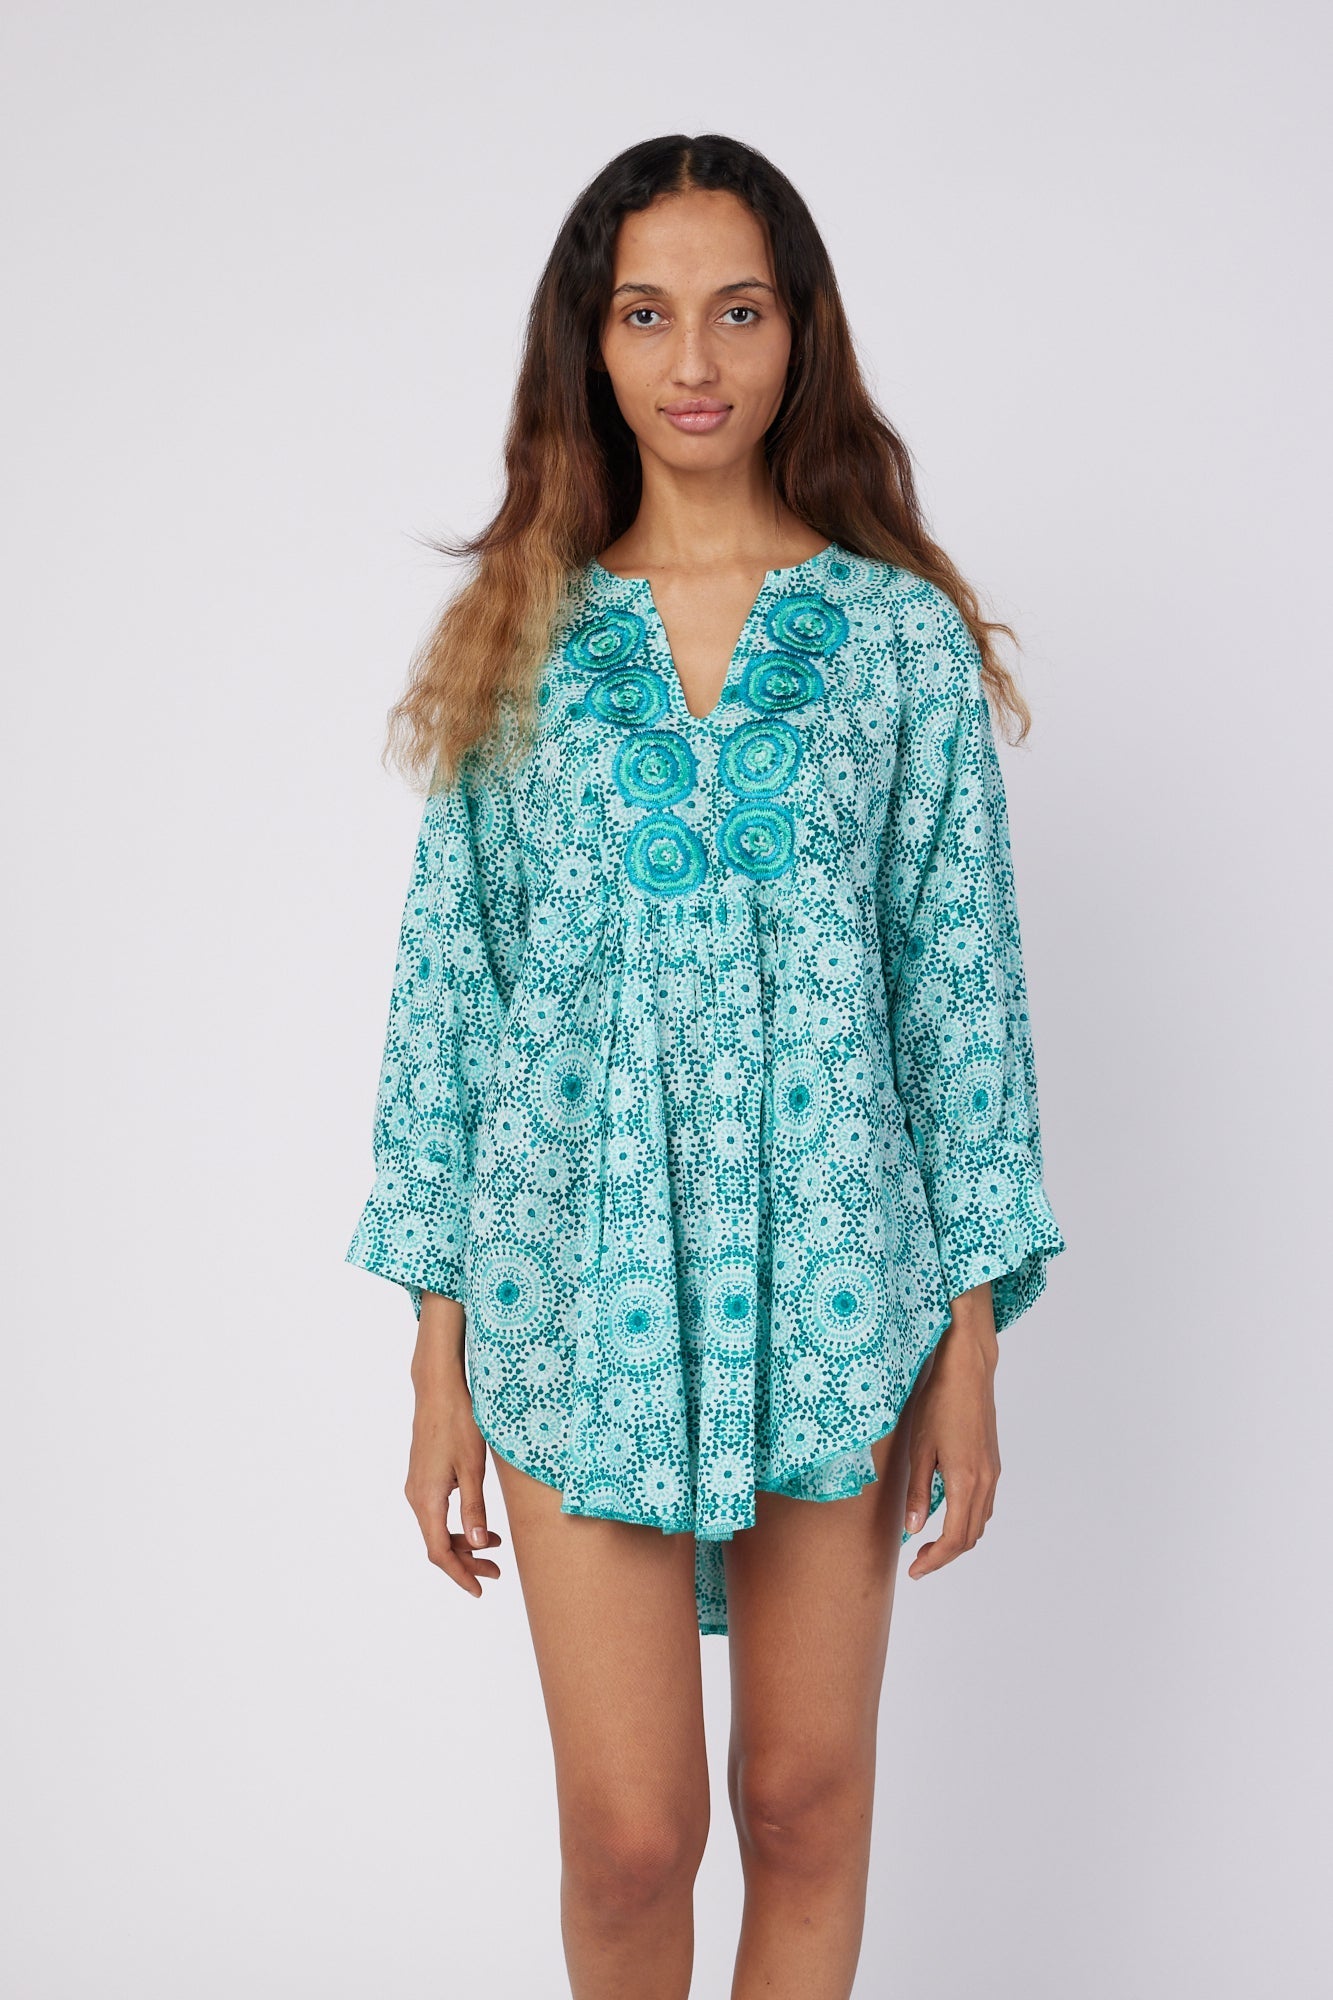 ModaPosa Belen Dolman Sleeve Hand Embroidered Swiss Dot Tunic in Moroccan Tile . Discover women's resort dresses and lifestyle clothing inspired by the Mediterranean. Free worldwide shipping available!